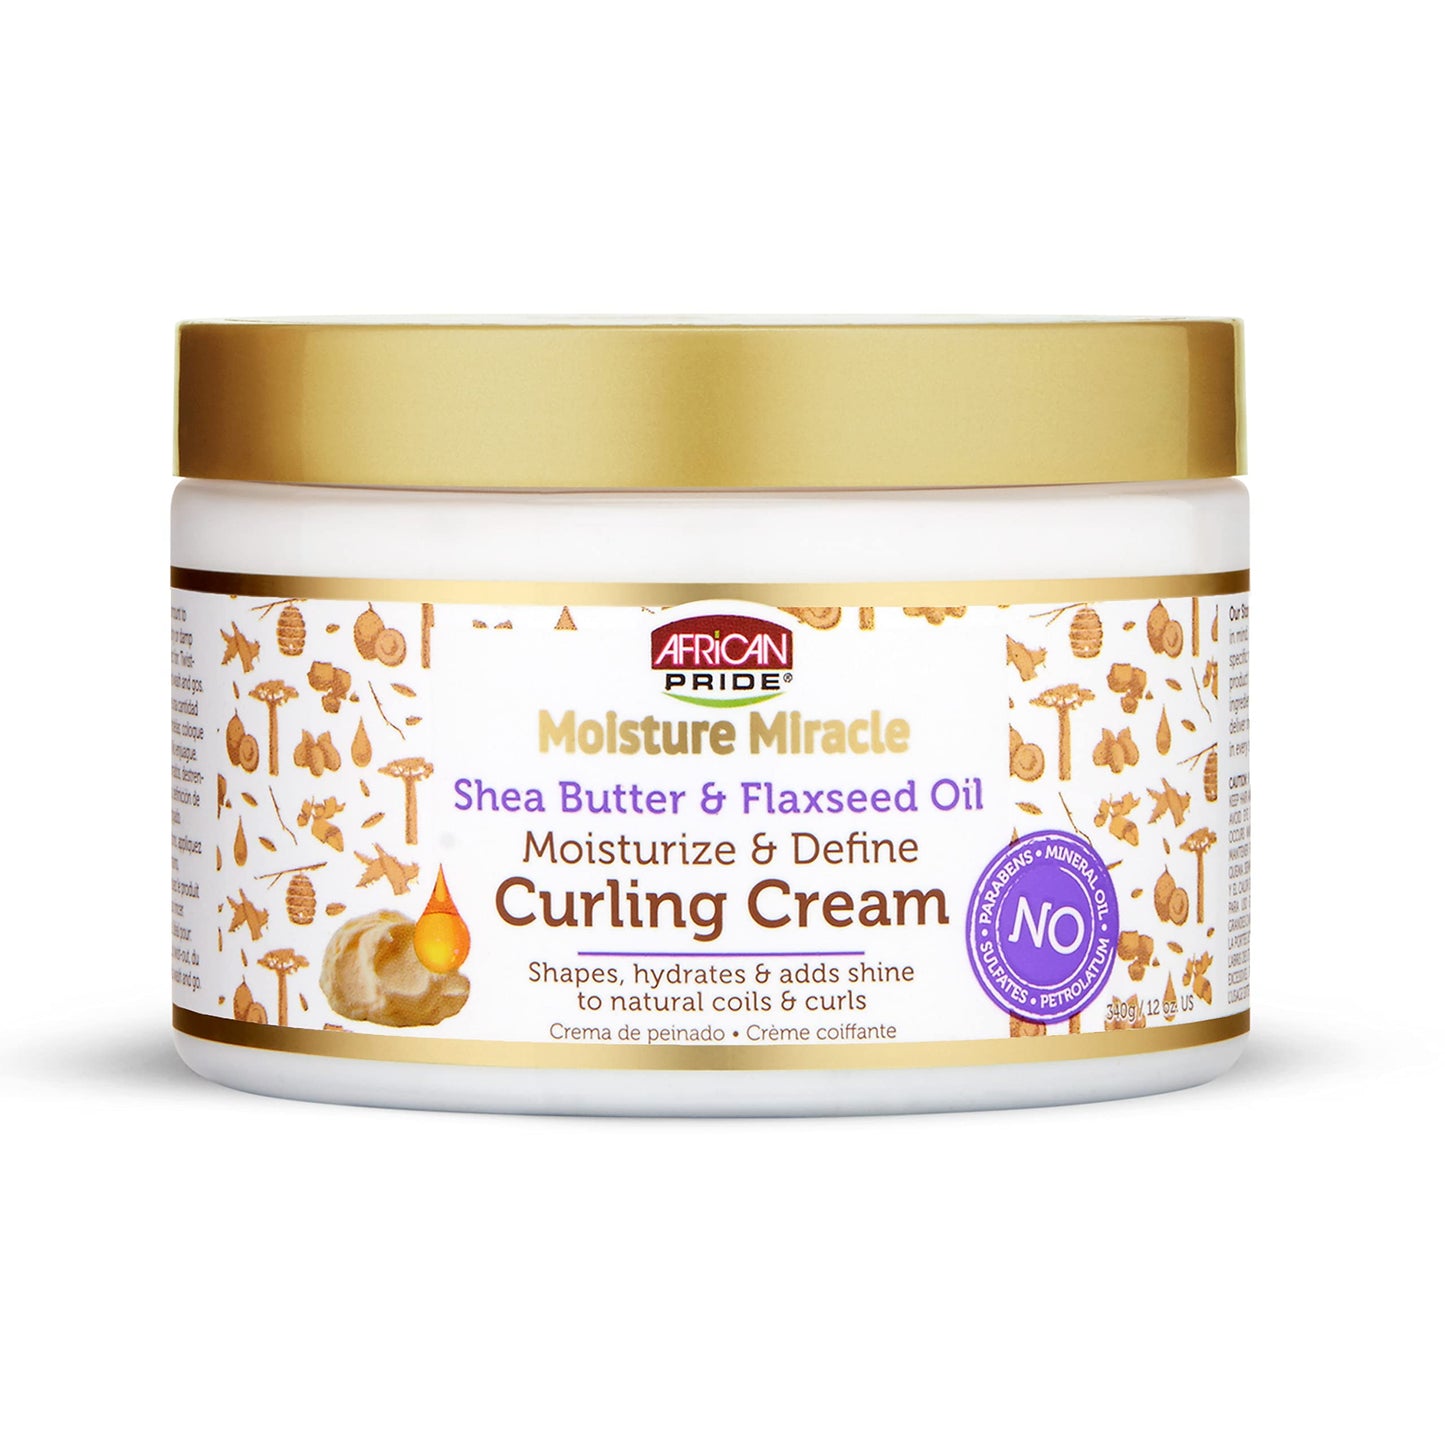 African Pride Moisture Miracle Shea Butter & Flaxseed Oil Moisturize & Define Curling Cream 12 oz